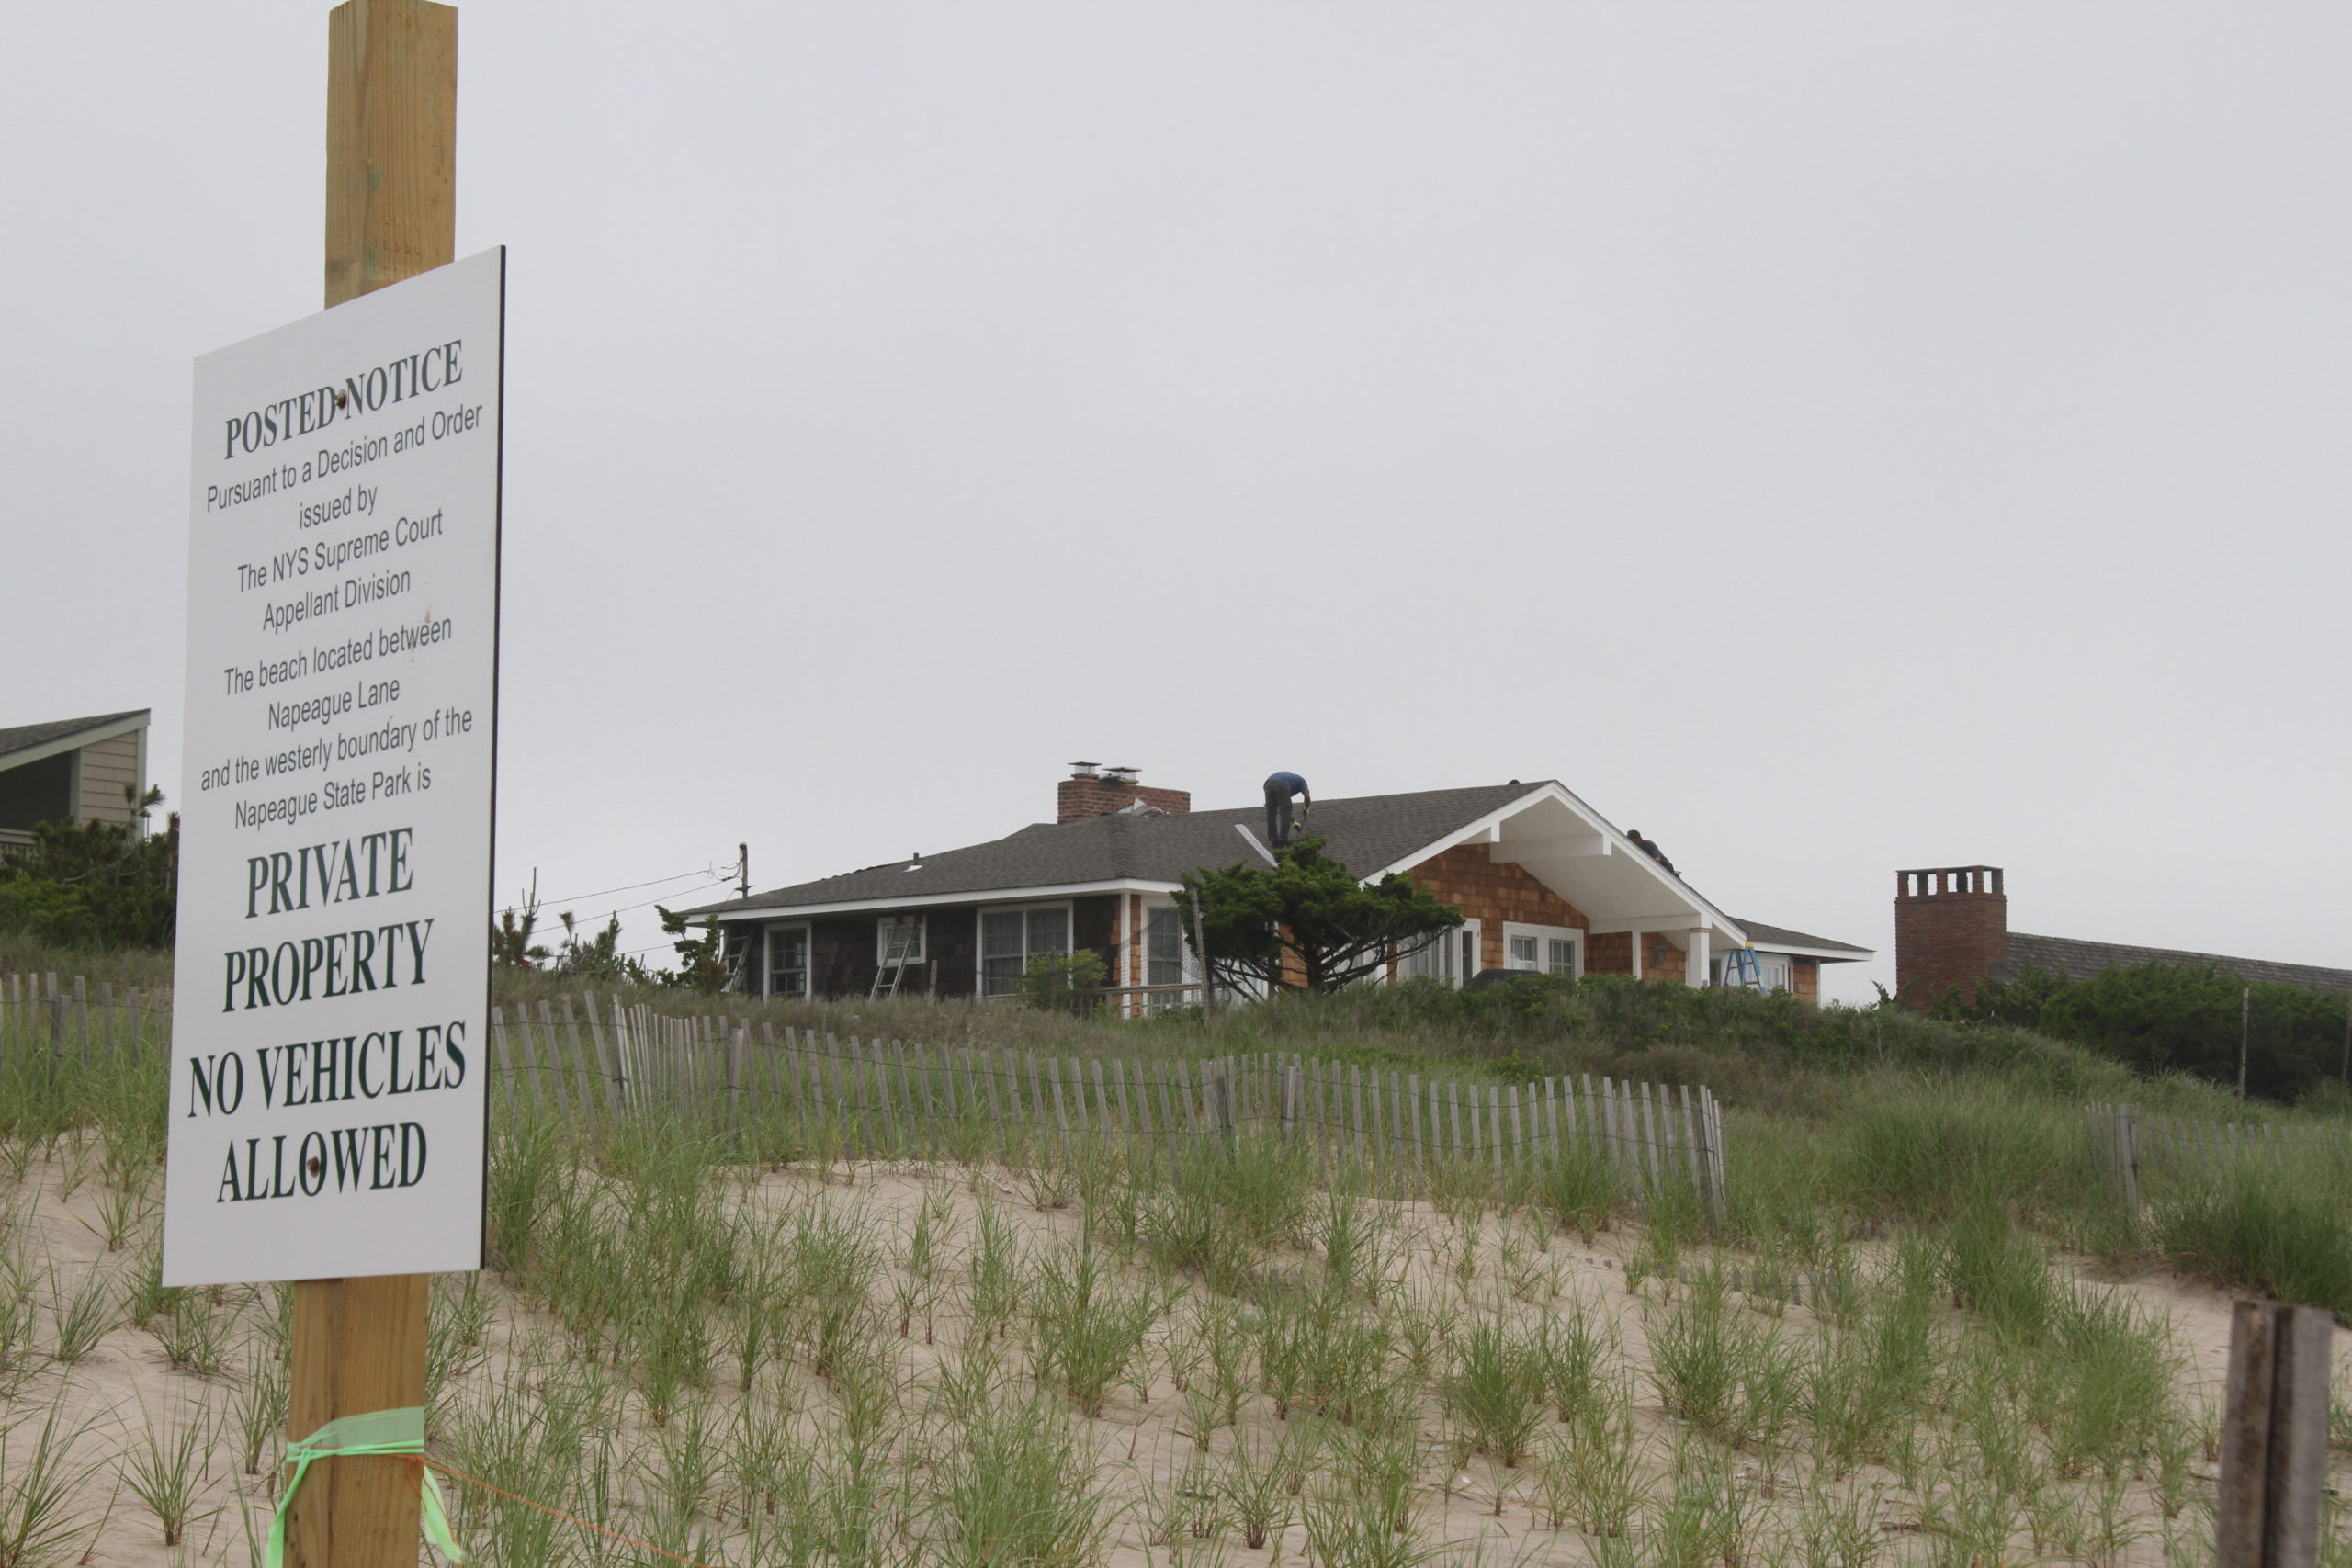 Beach access in East Hampton and Southampton was the topic of discussion at the most recent Press Sessions forum, on October 28.